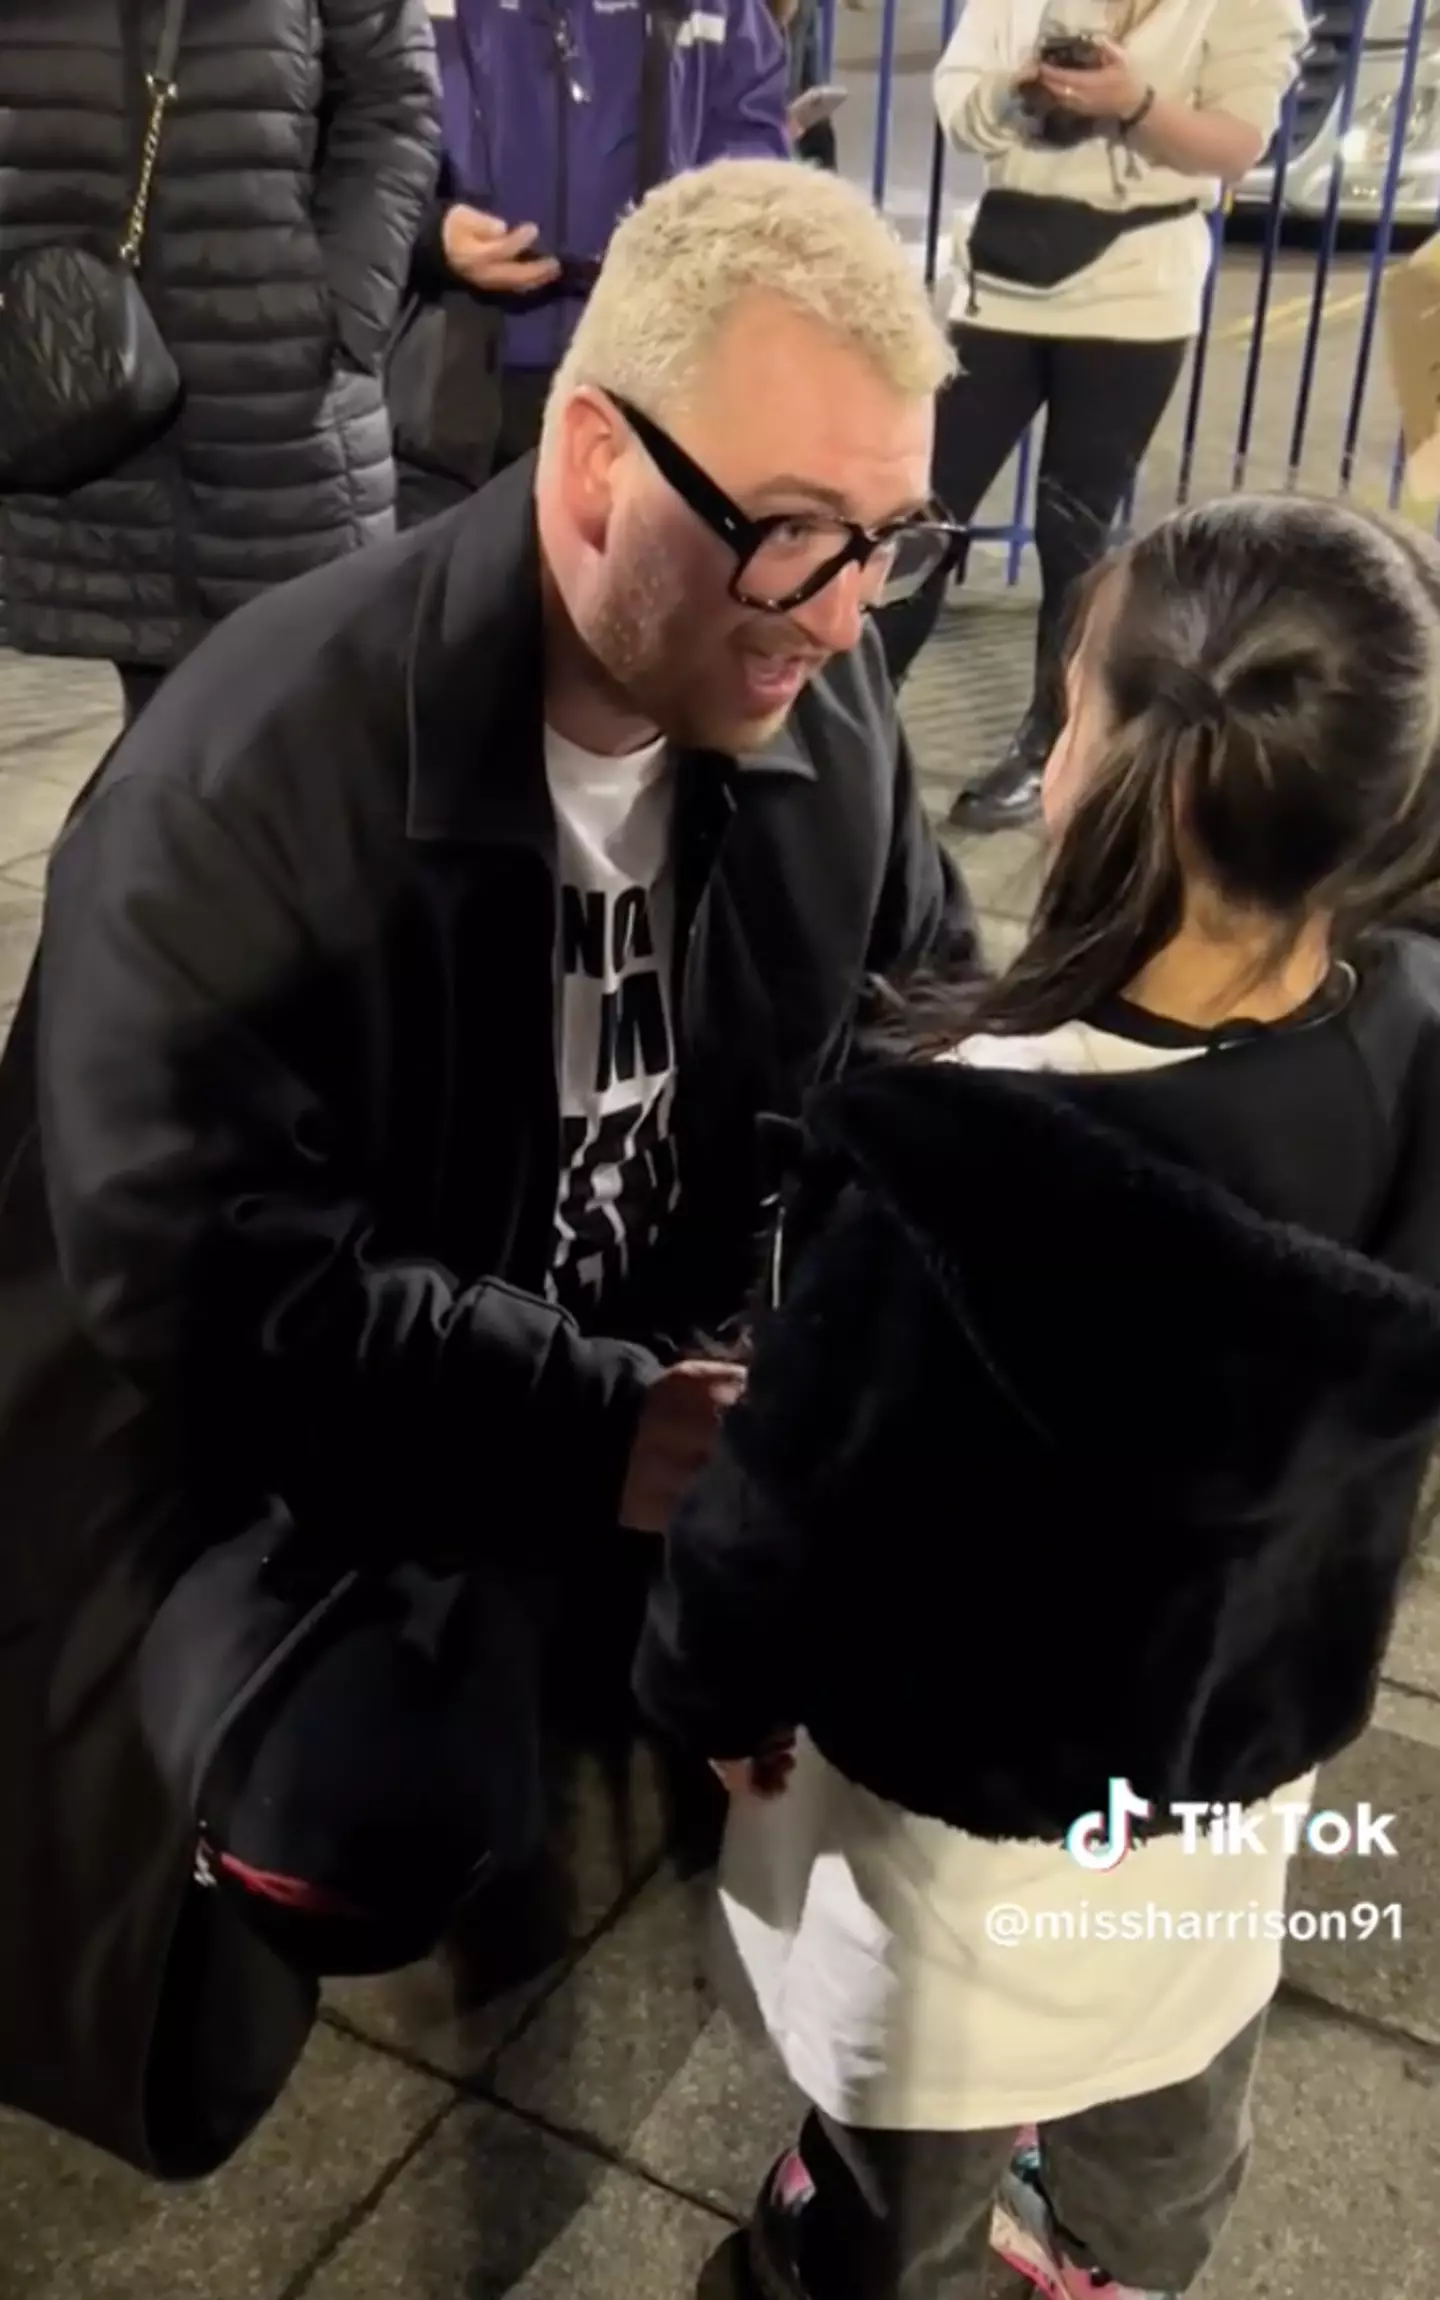 Smith took time out to meet with fans after the gig.